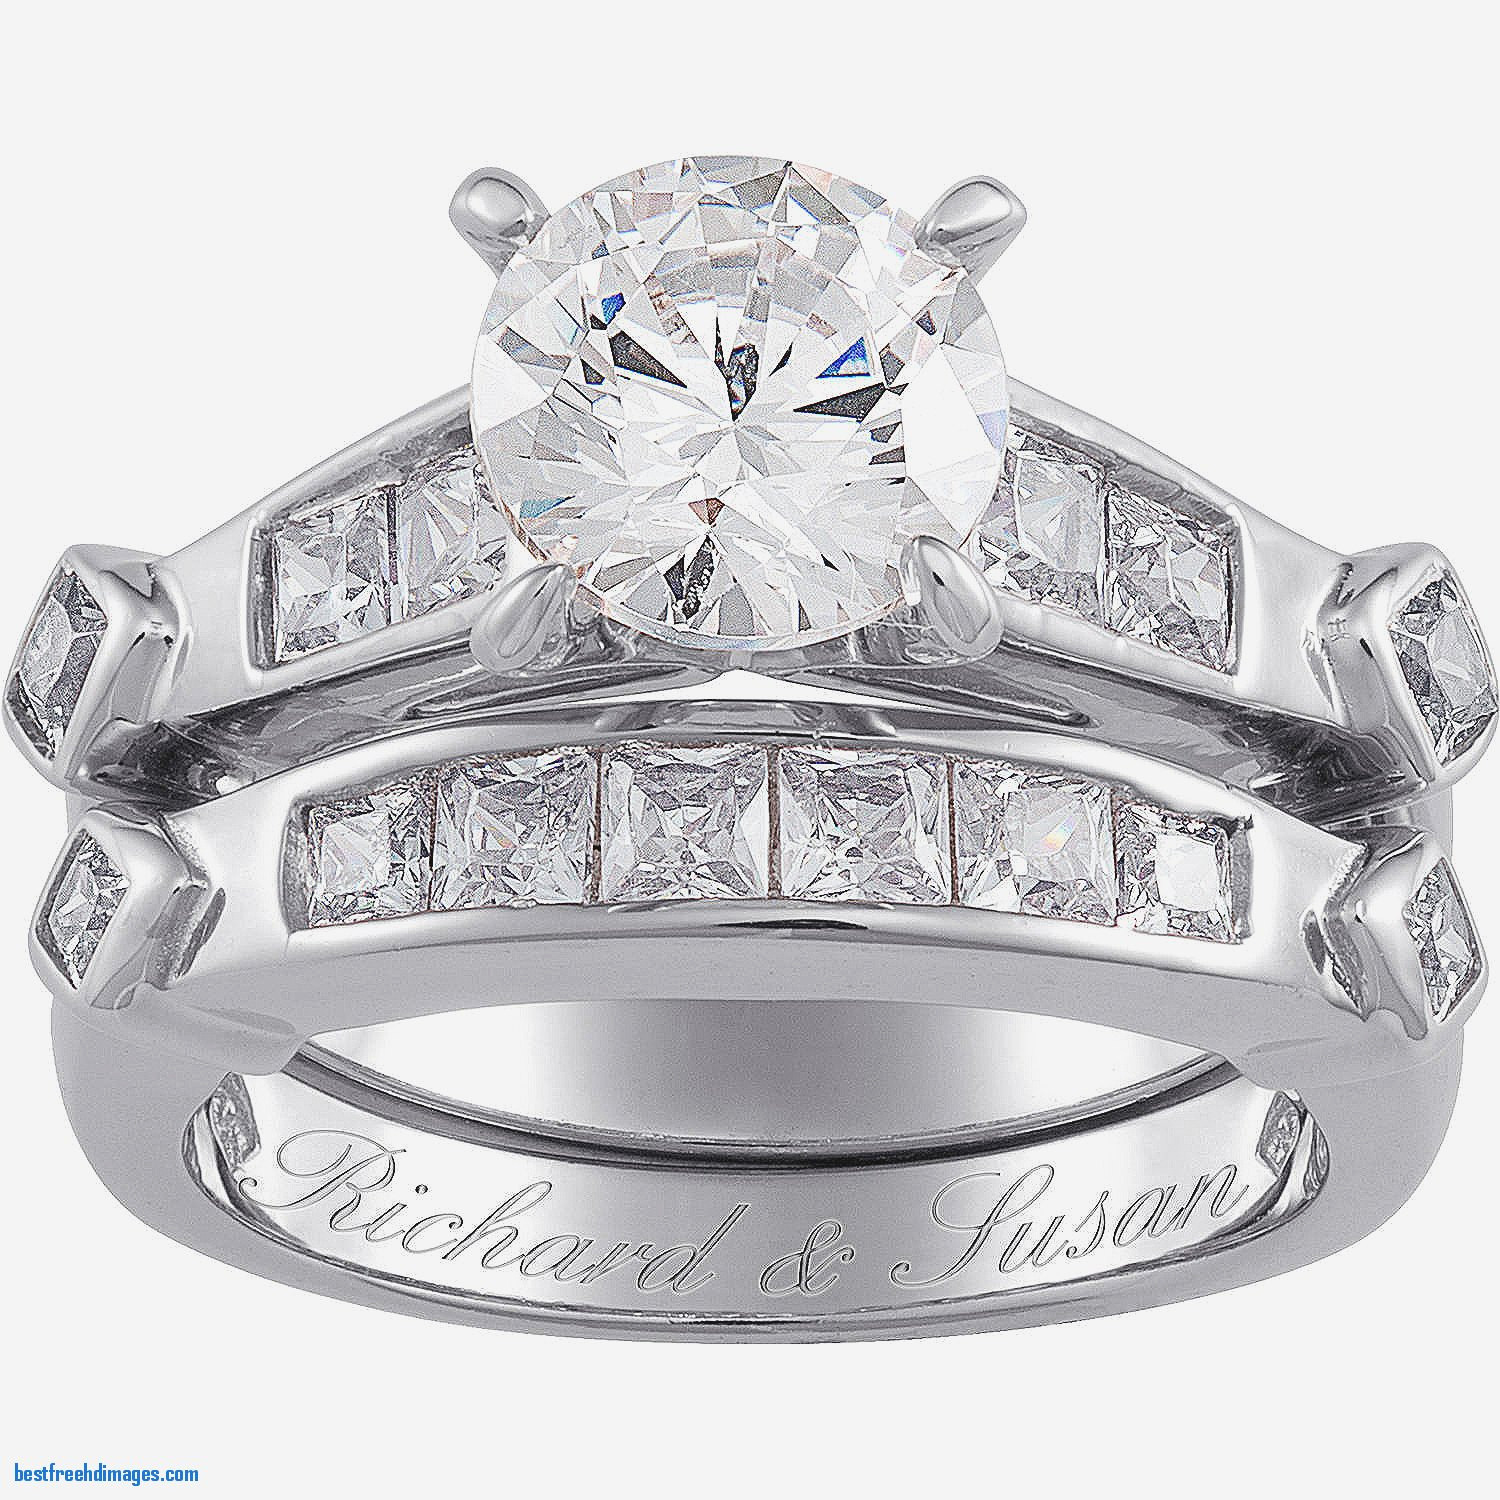 Cheap Wedding Rings For Her And Him
 42 Best Cheap Wedding Ring Sets For Him And Her White